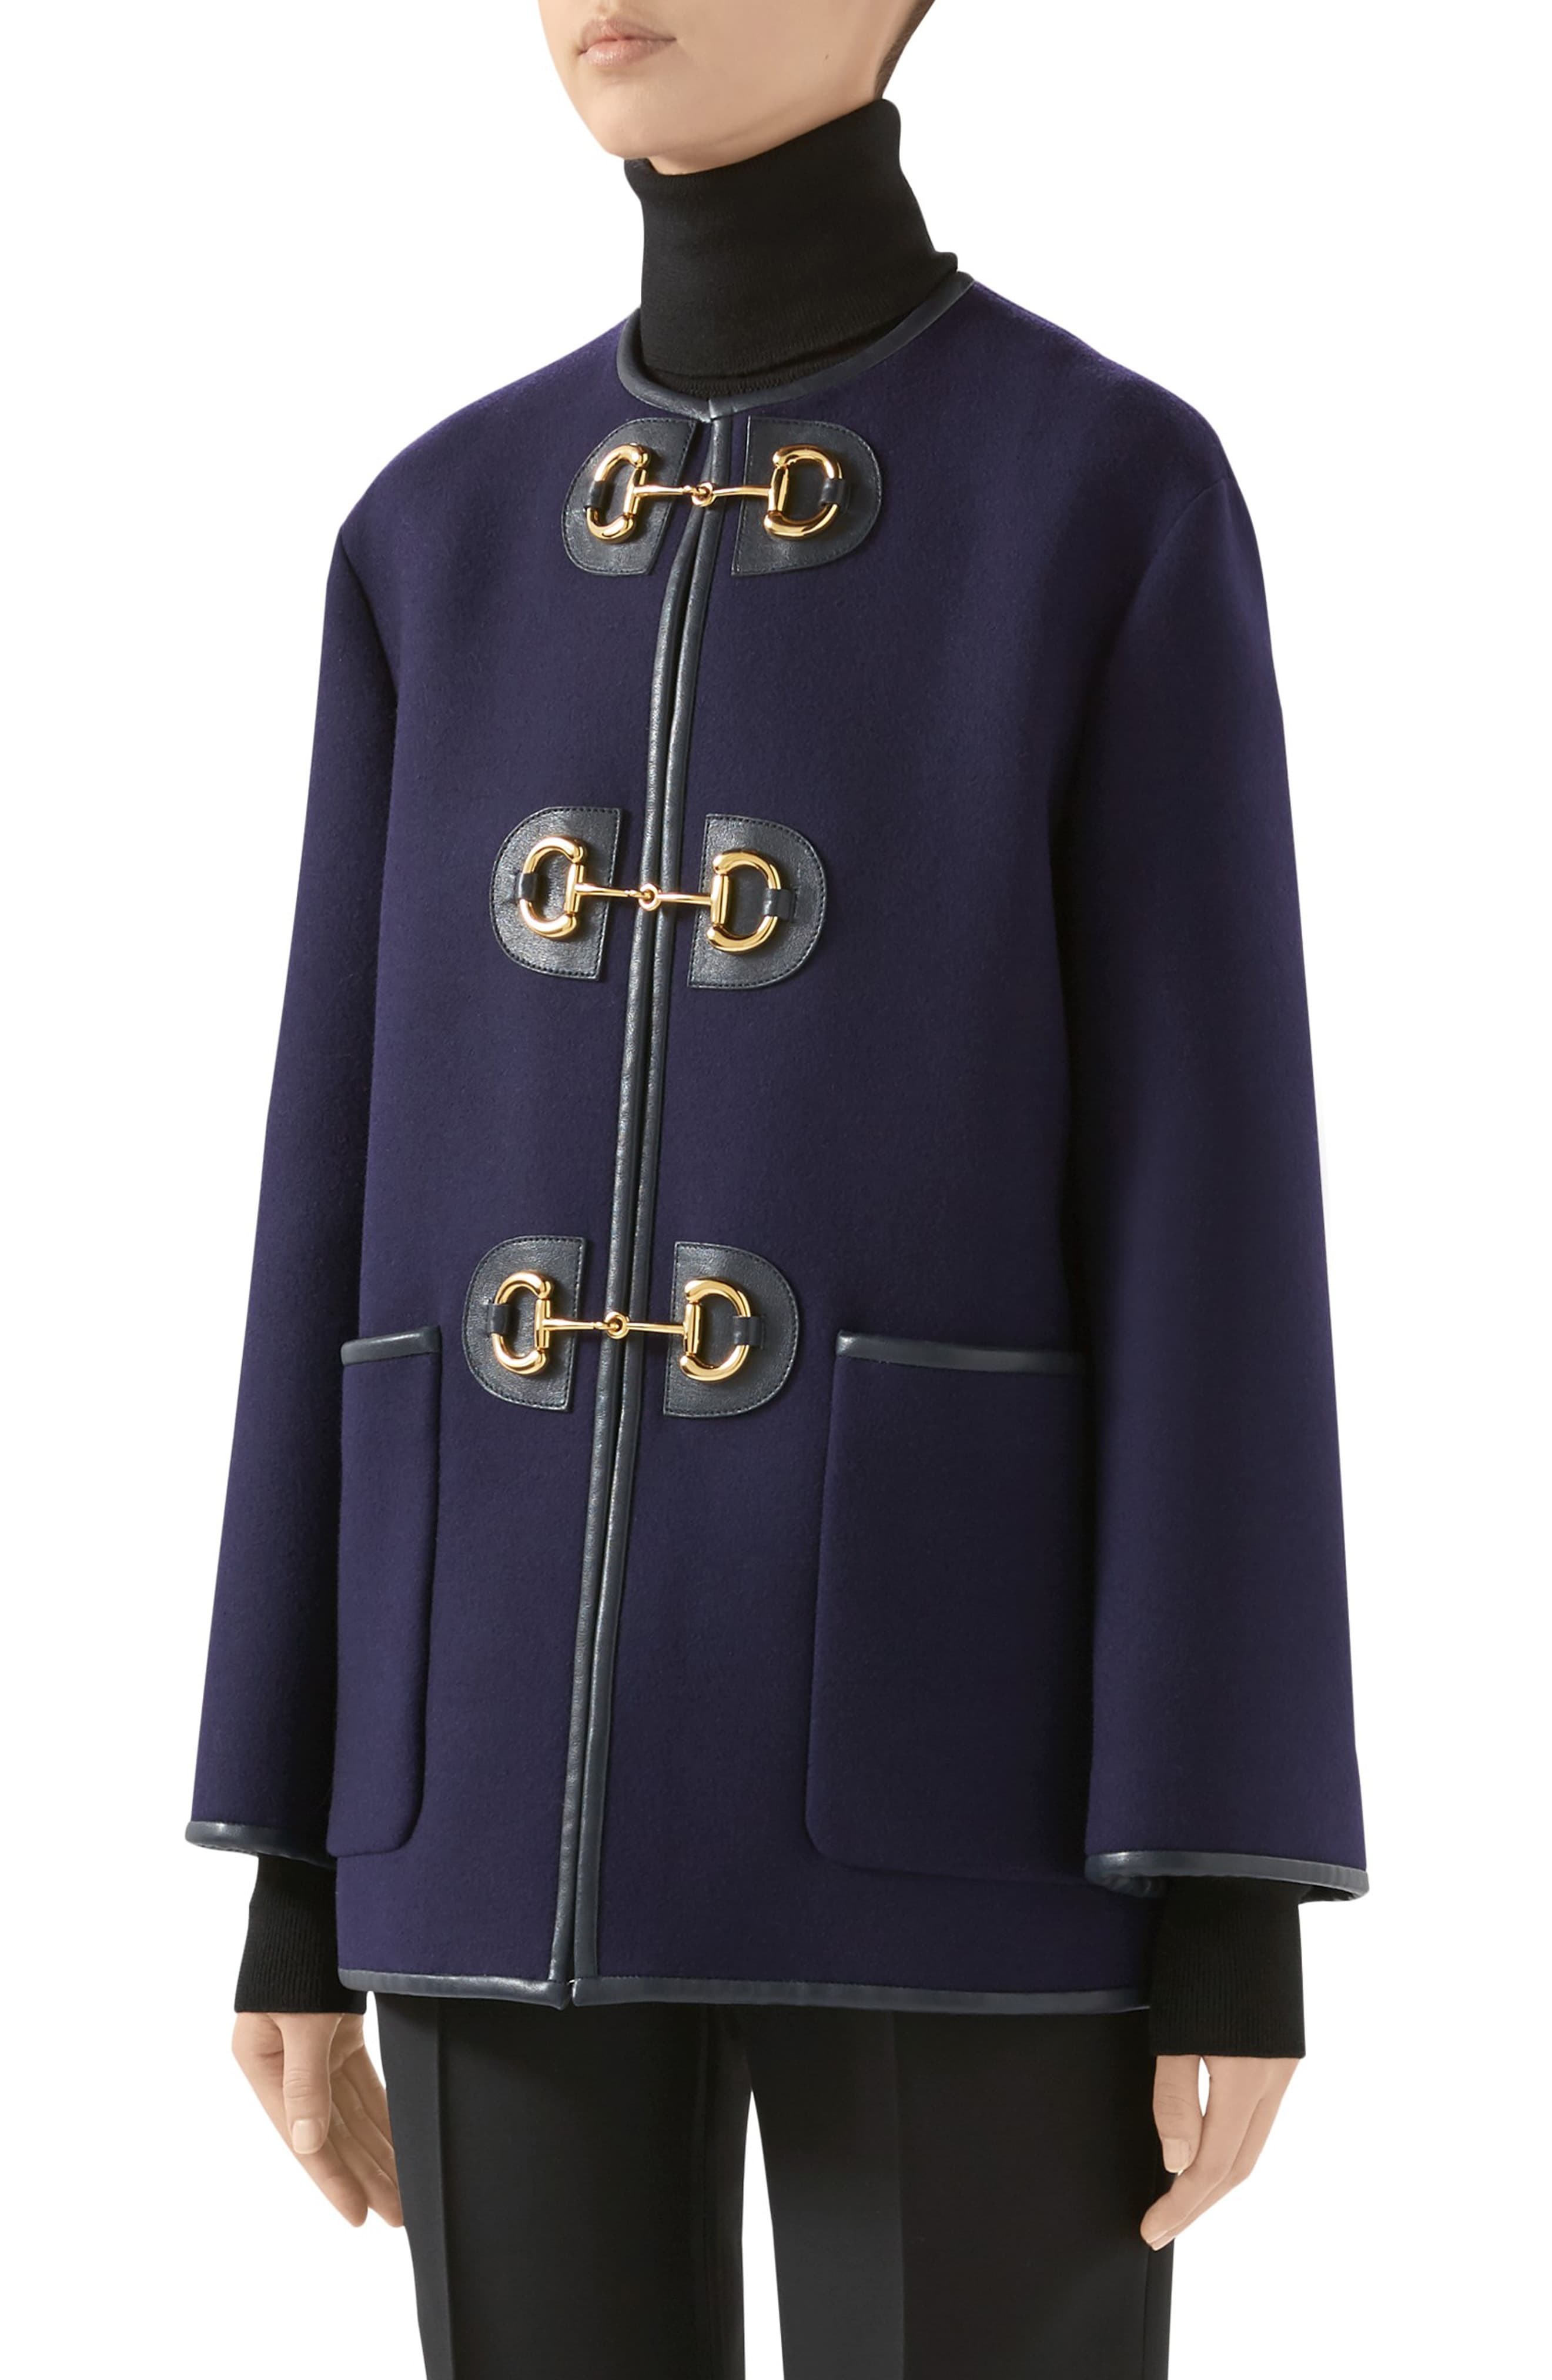 Fearless Analytisk interferens Gucci Horsebit Toggle Wool Blend Military Caban Coat, $3,500 | Nordstrom |  Lookastic